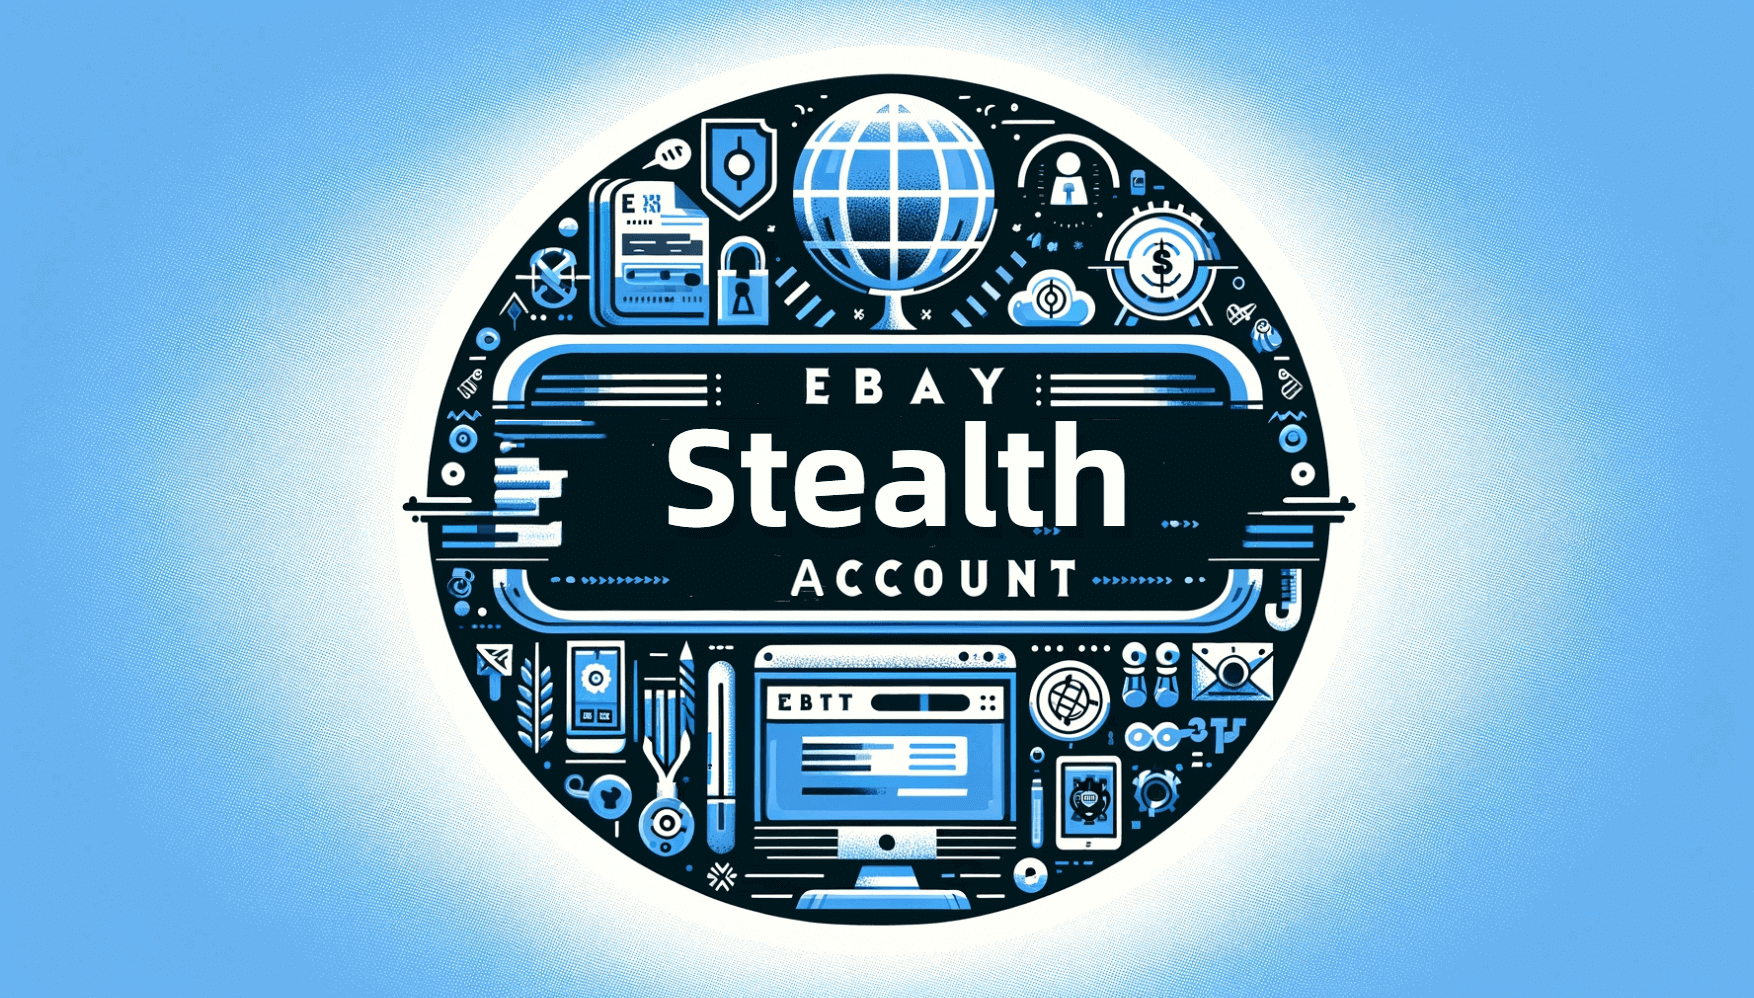 How to Create or Get an eBay Stealth Account